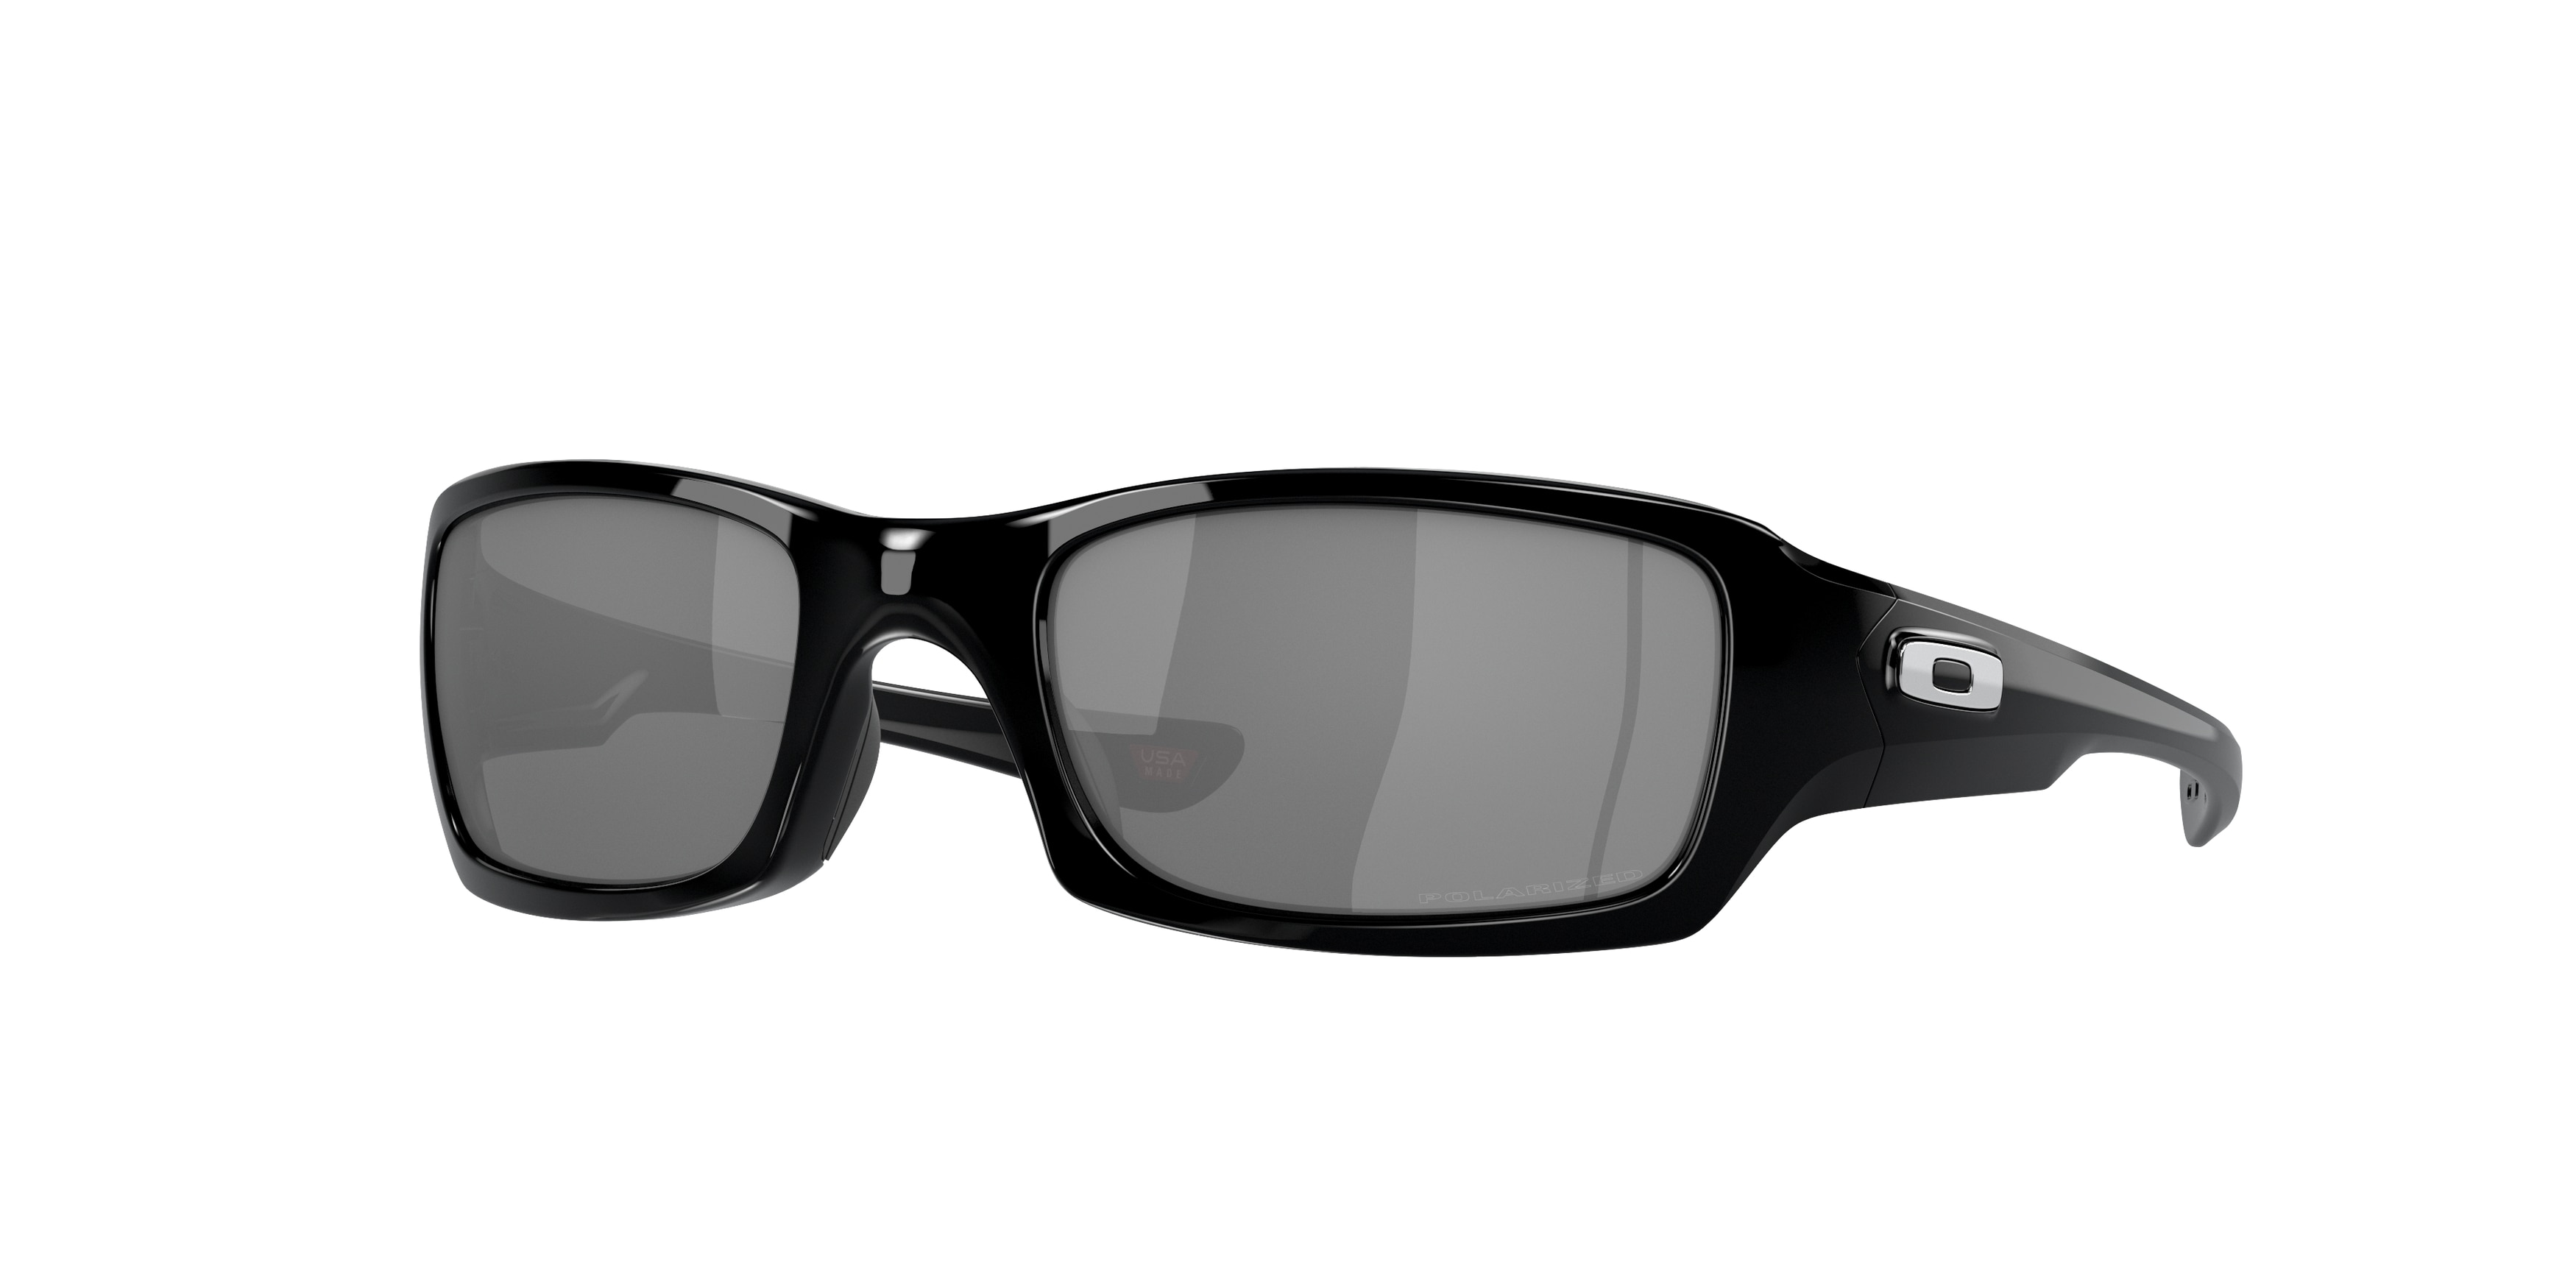 Oakley Fives Squared OO9238